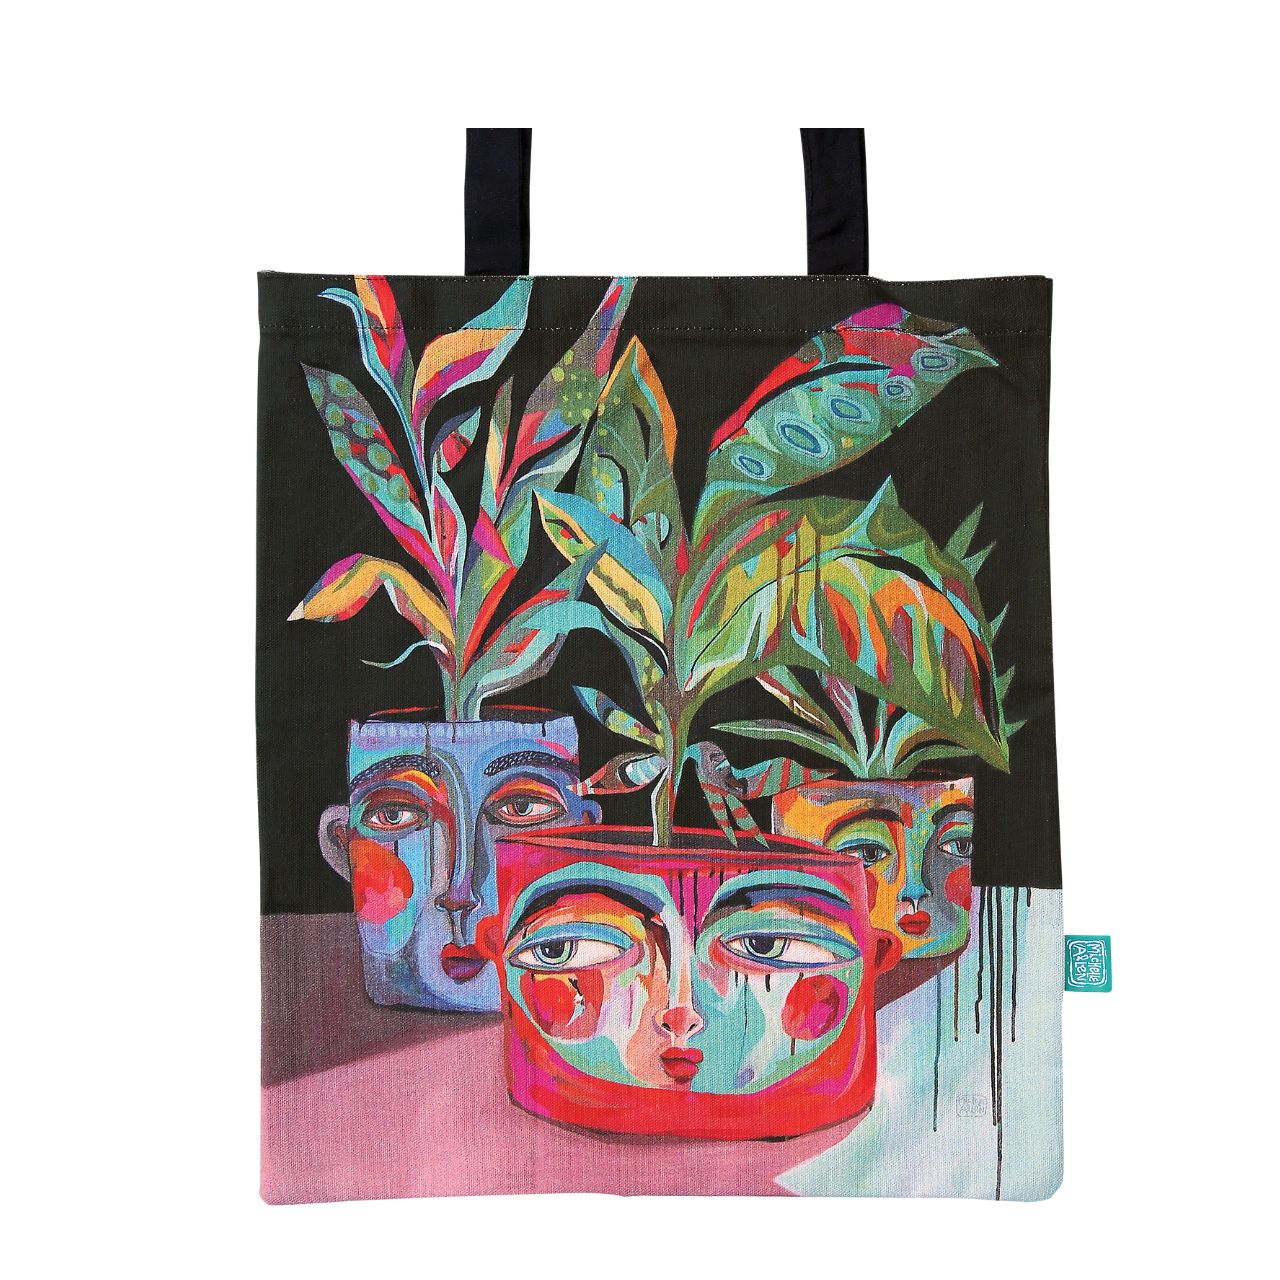 Michelle Allen Grow Boldy Tote Bag  Our Grow Boldly Tote is exactly what you need to carry anything your heart desires. The Tote is the perfect catch-all for running from work to the grocery store, or from home to the zoo.